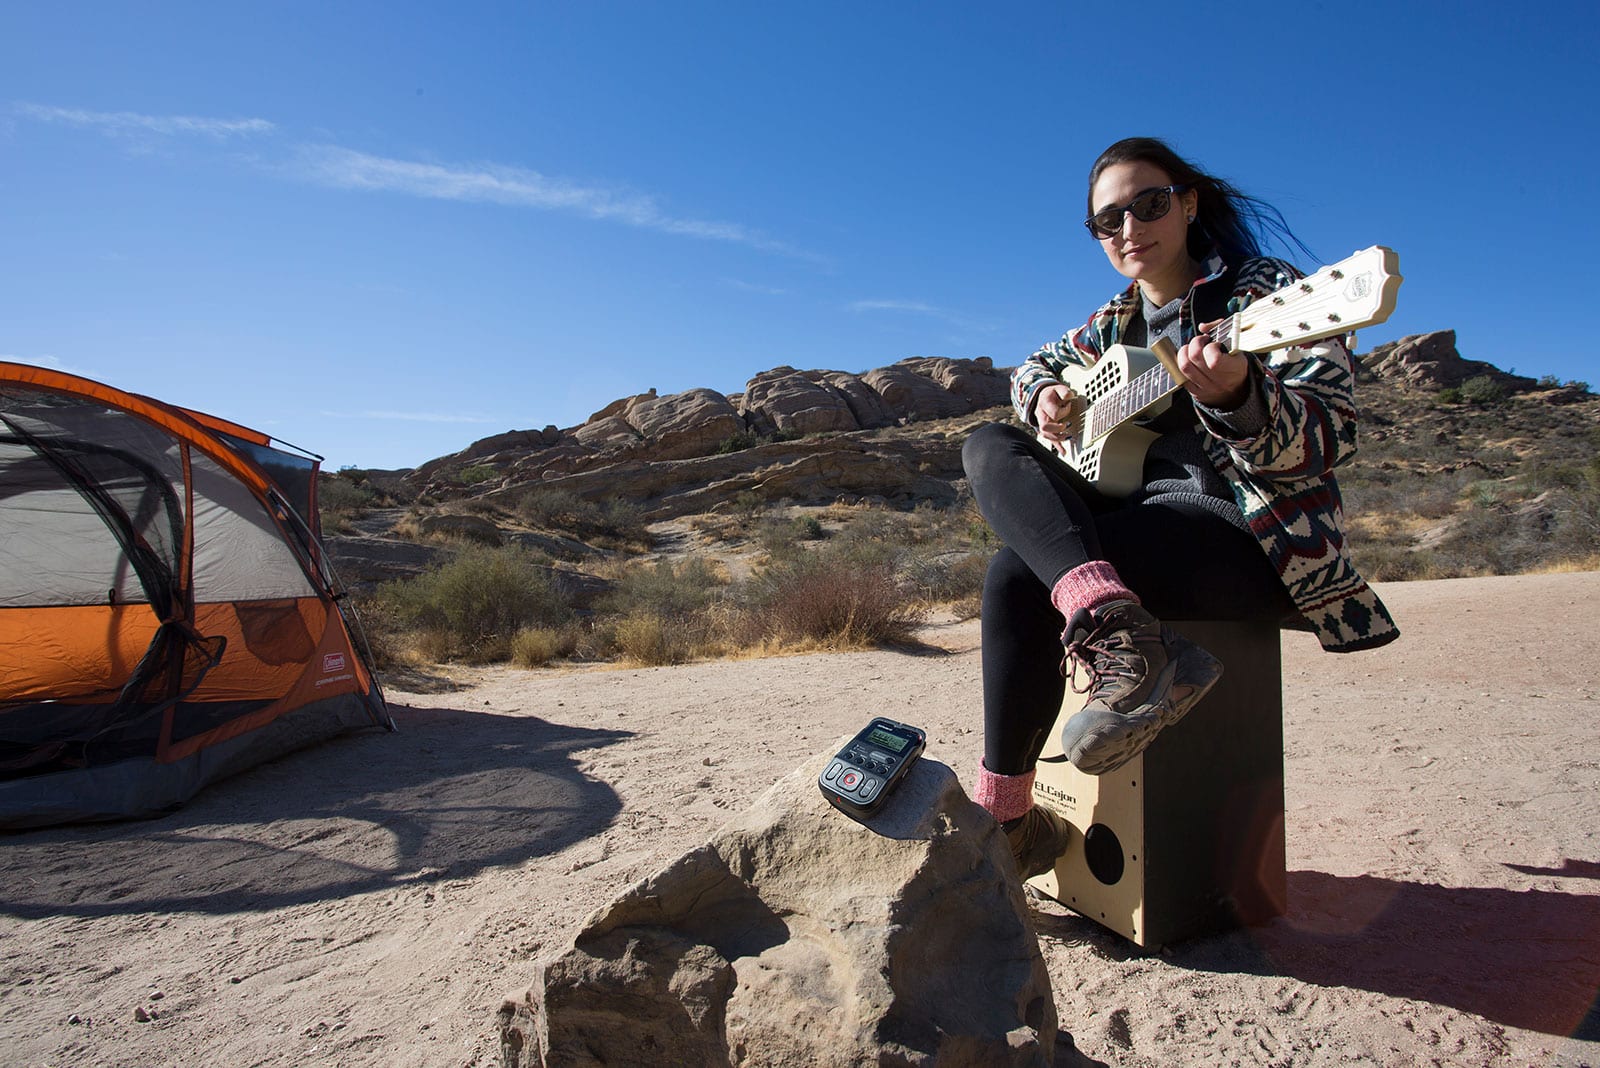 Who doesn’t like to record while sitting on a cajón in the dessert?